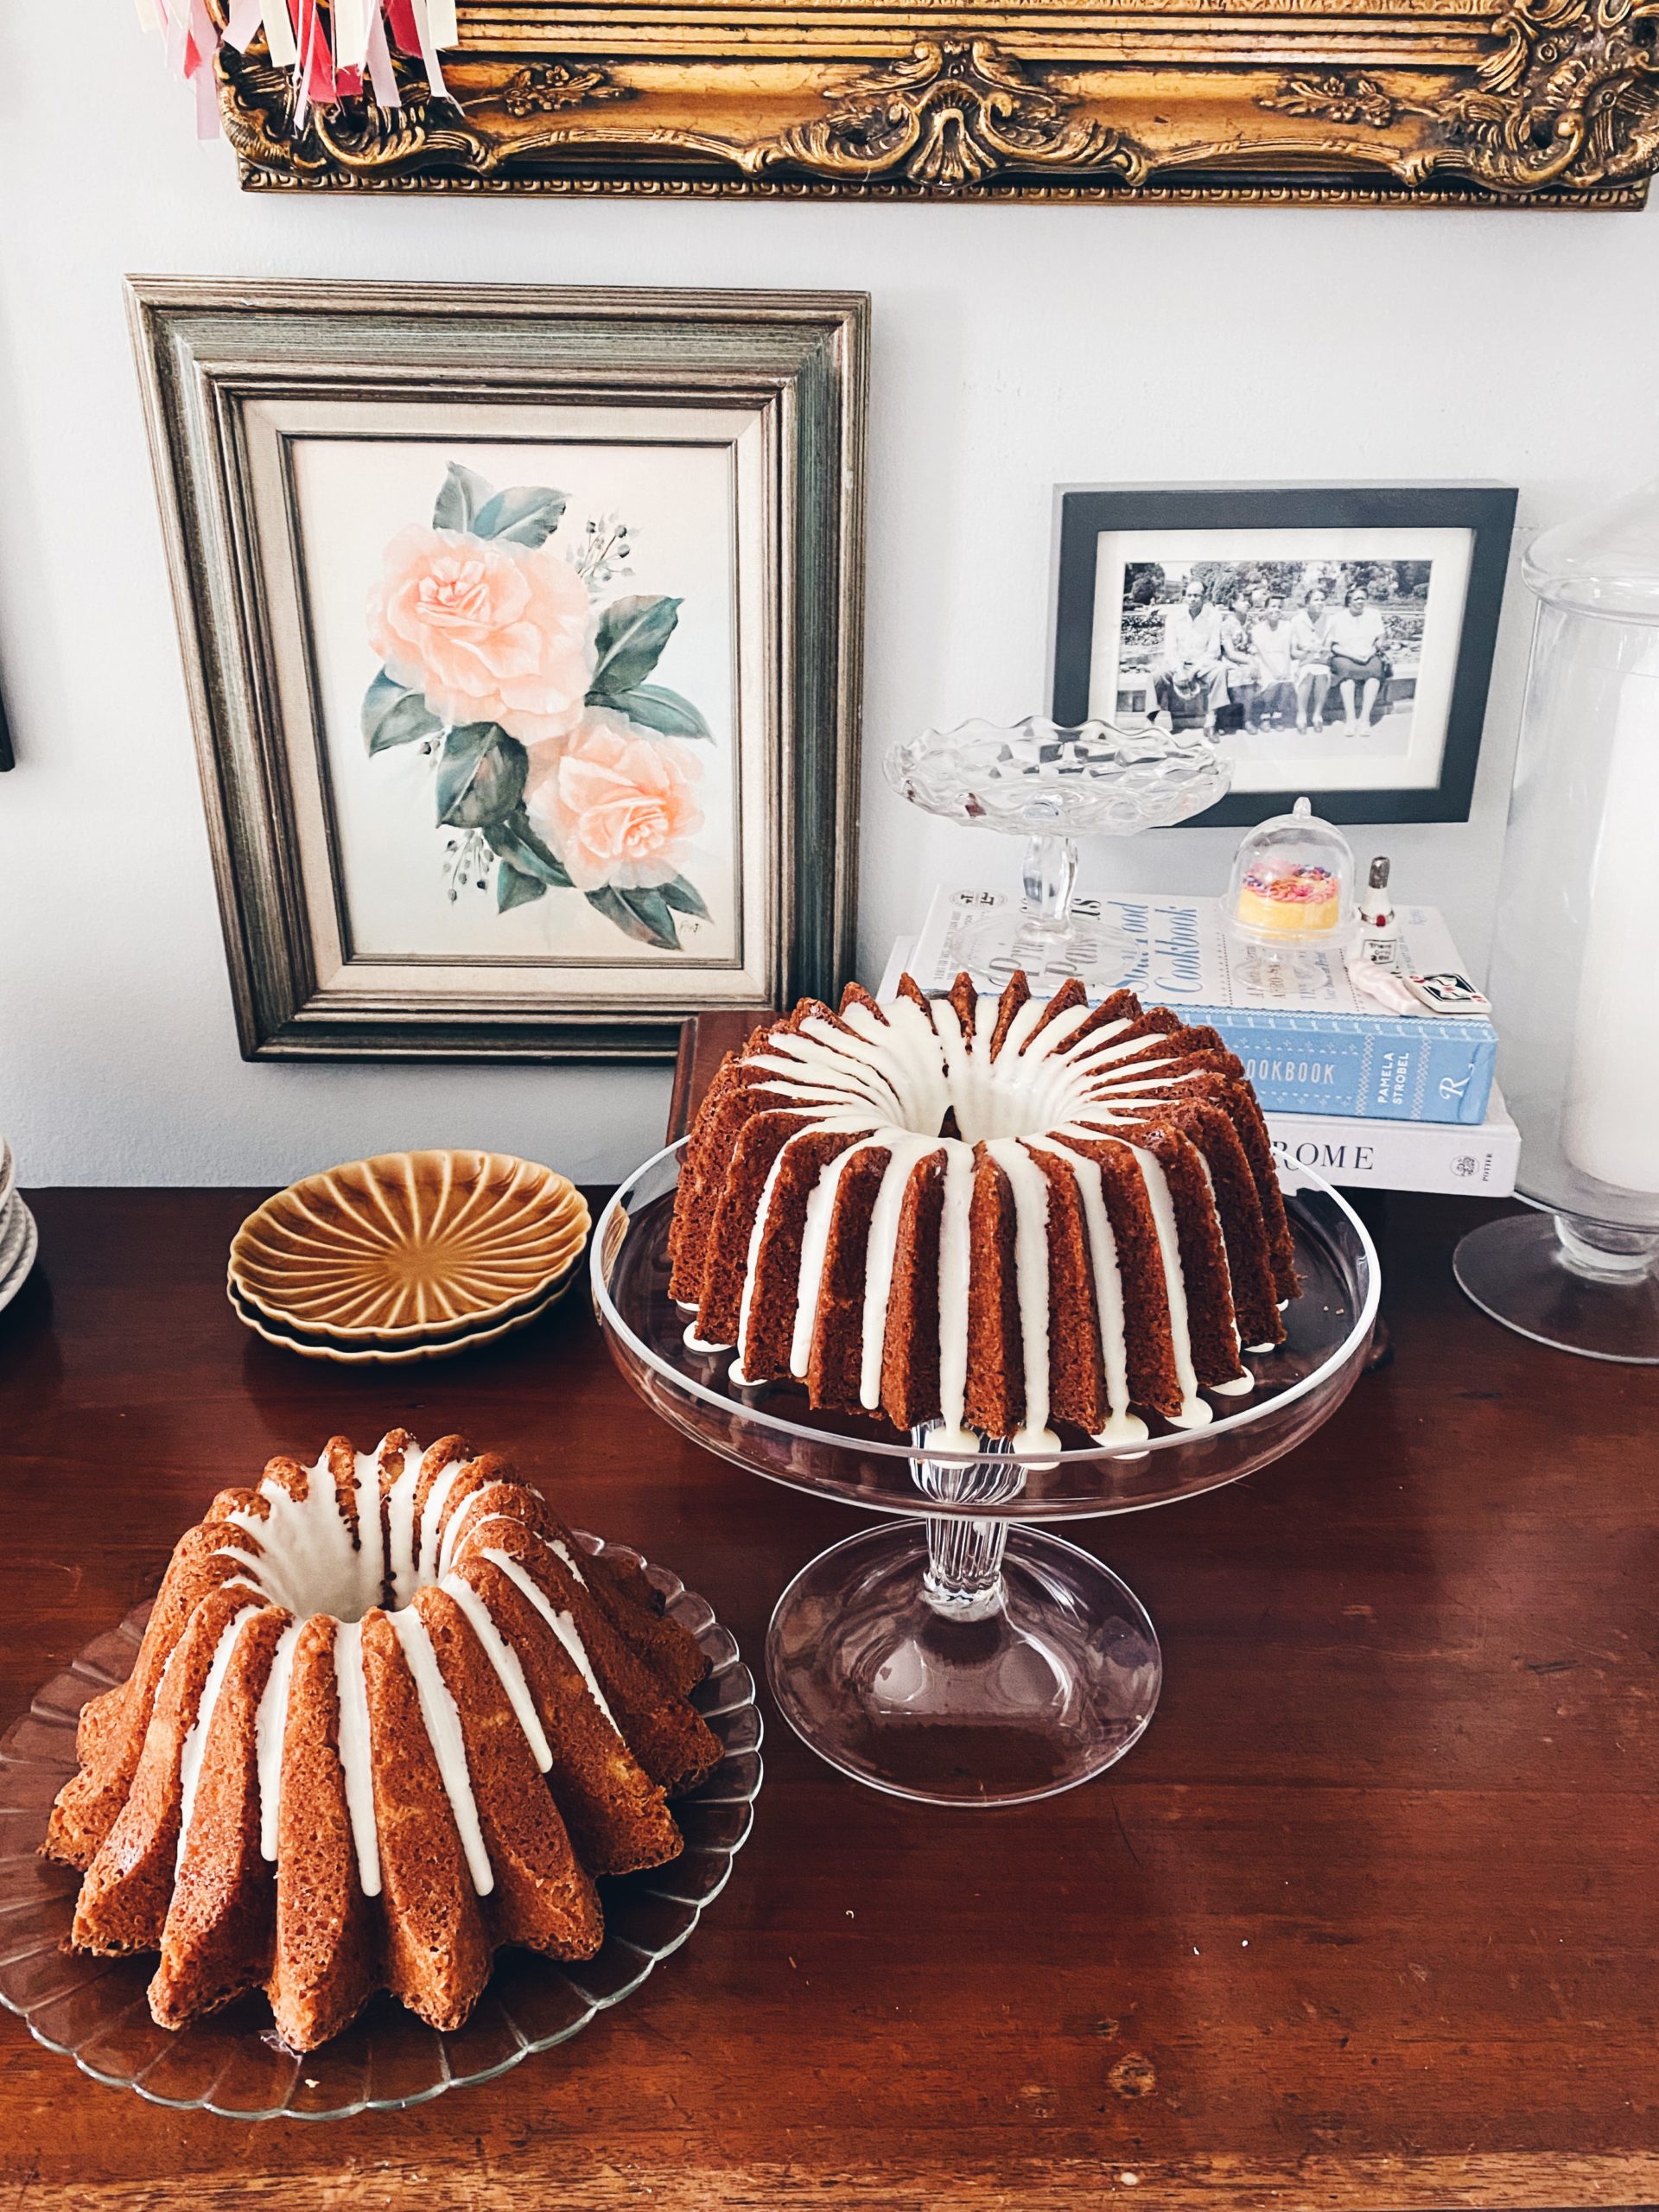 Mini-Bundt Cakes for Easy Holiday Gifting - Challenge Dairy